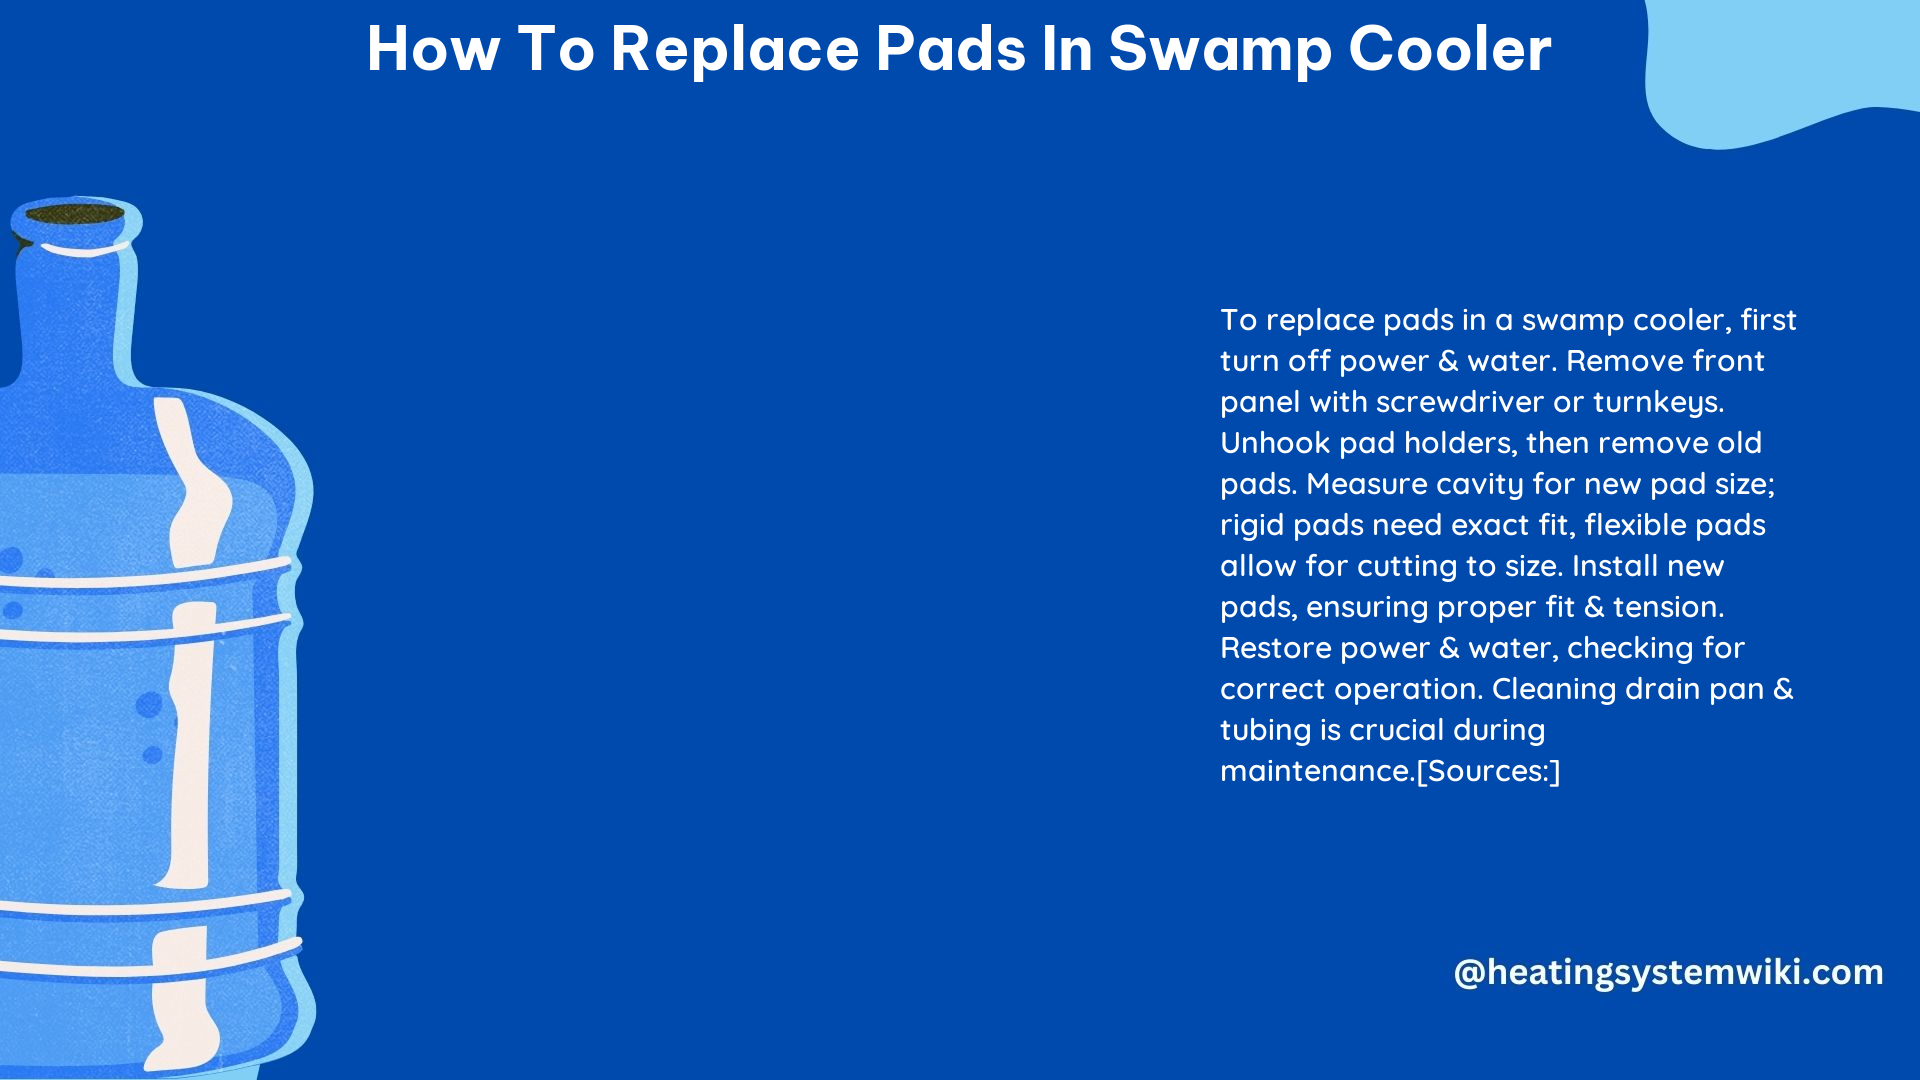 How to Replace Pads in Swamp Cooler